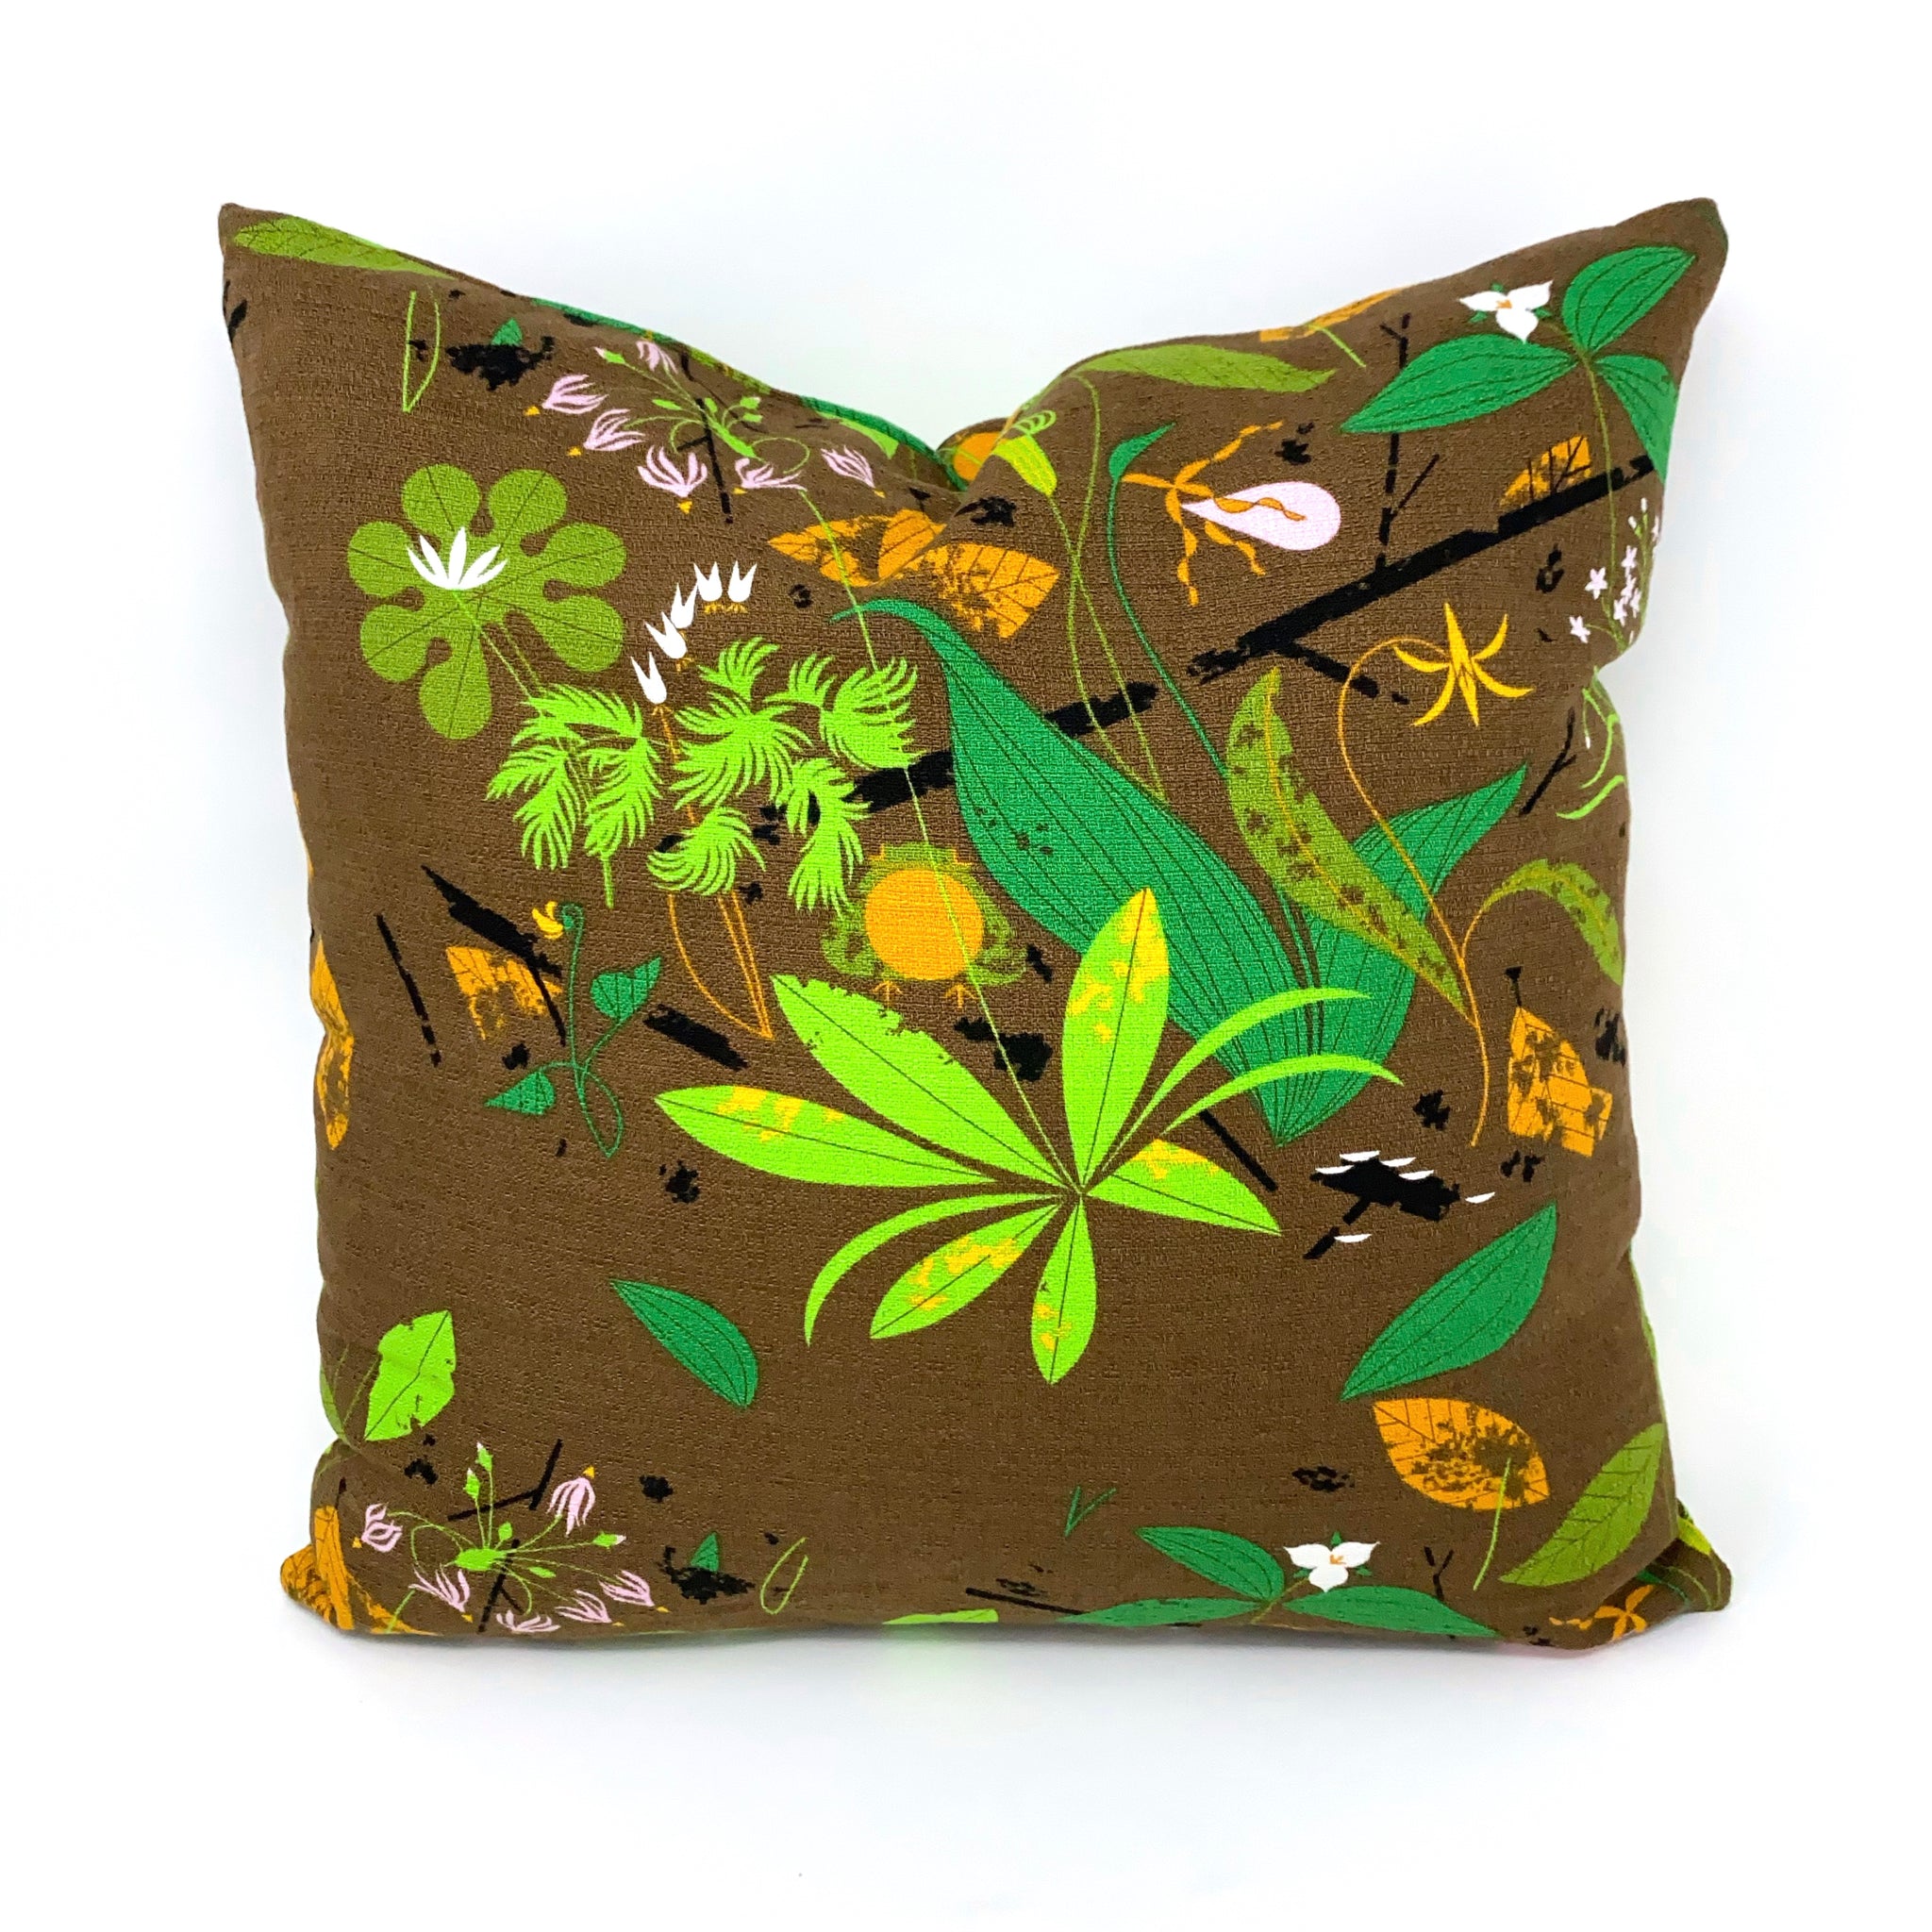 Throw Pillow Cover Charley Harper Barkcloth Spring Wildflowers